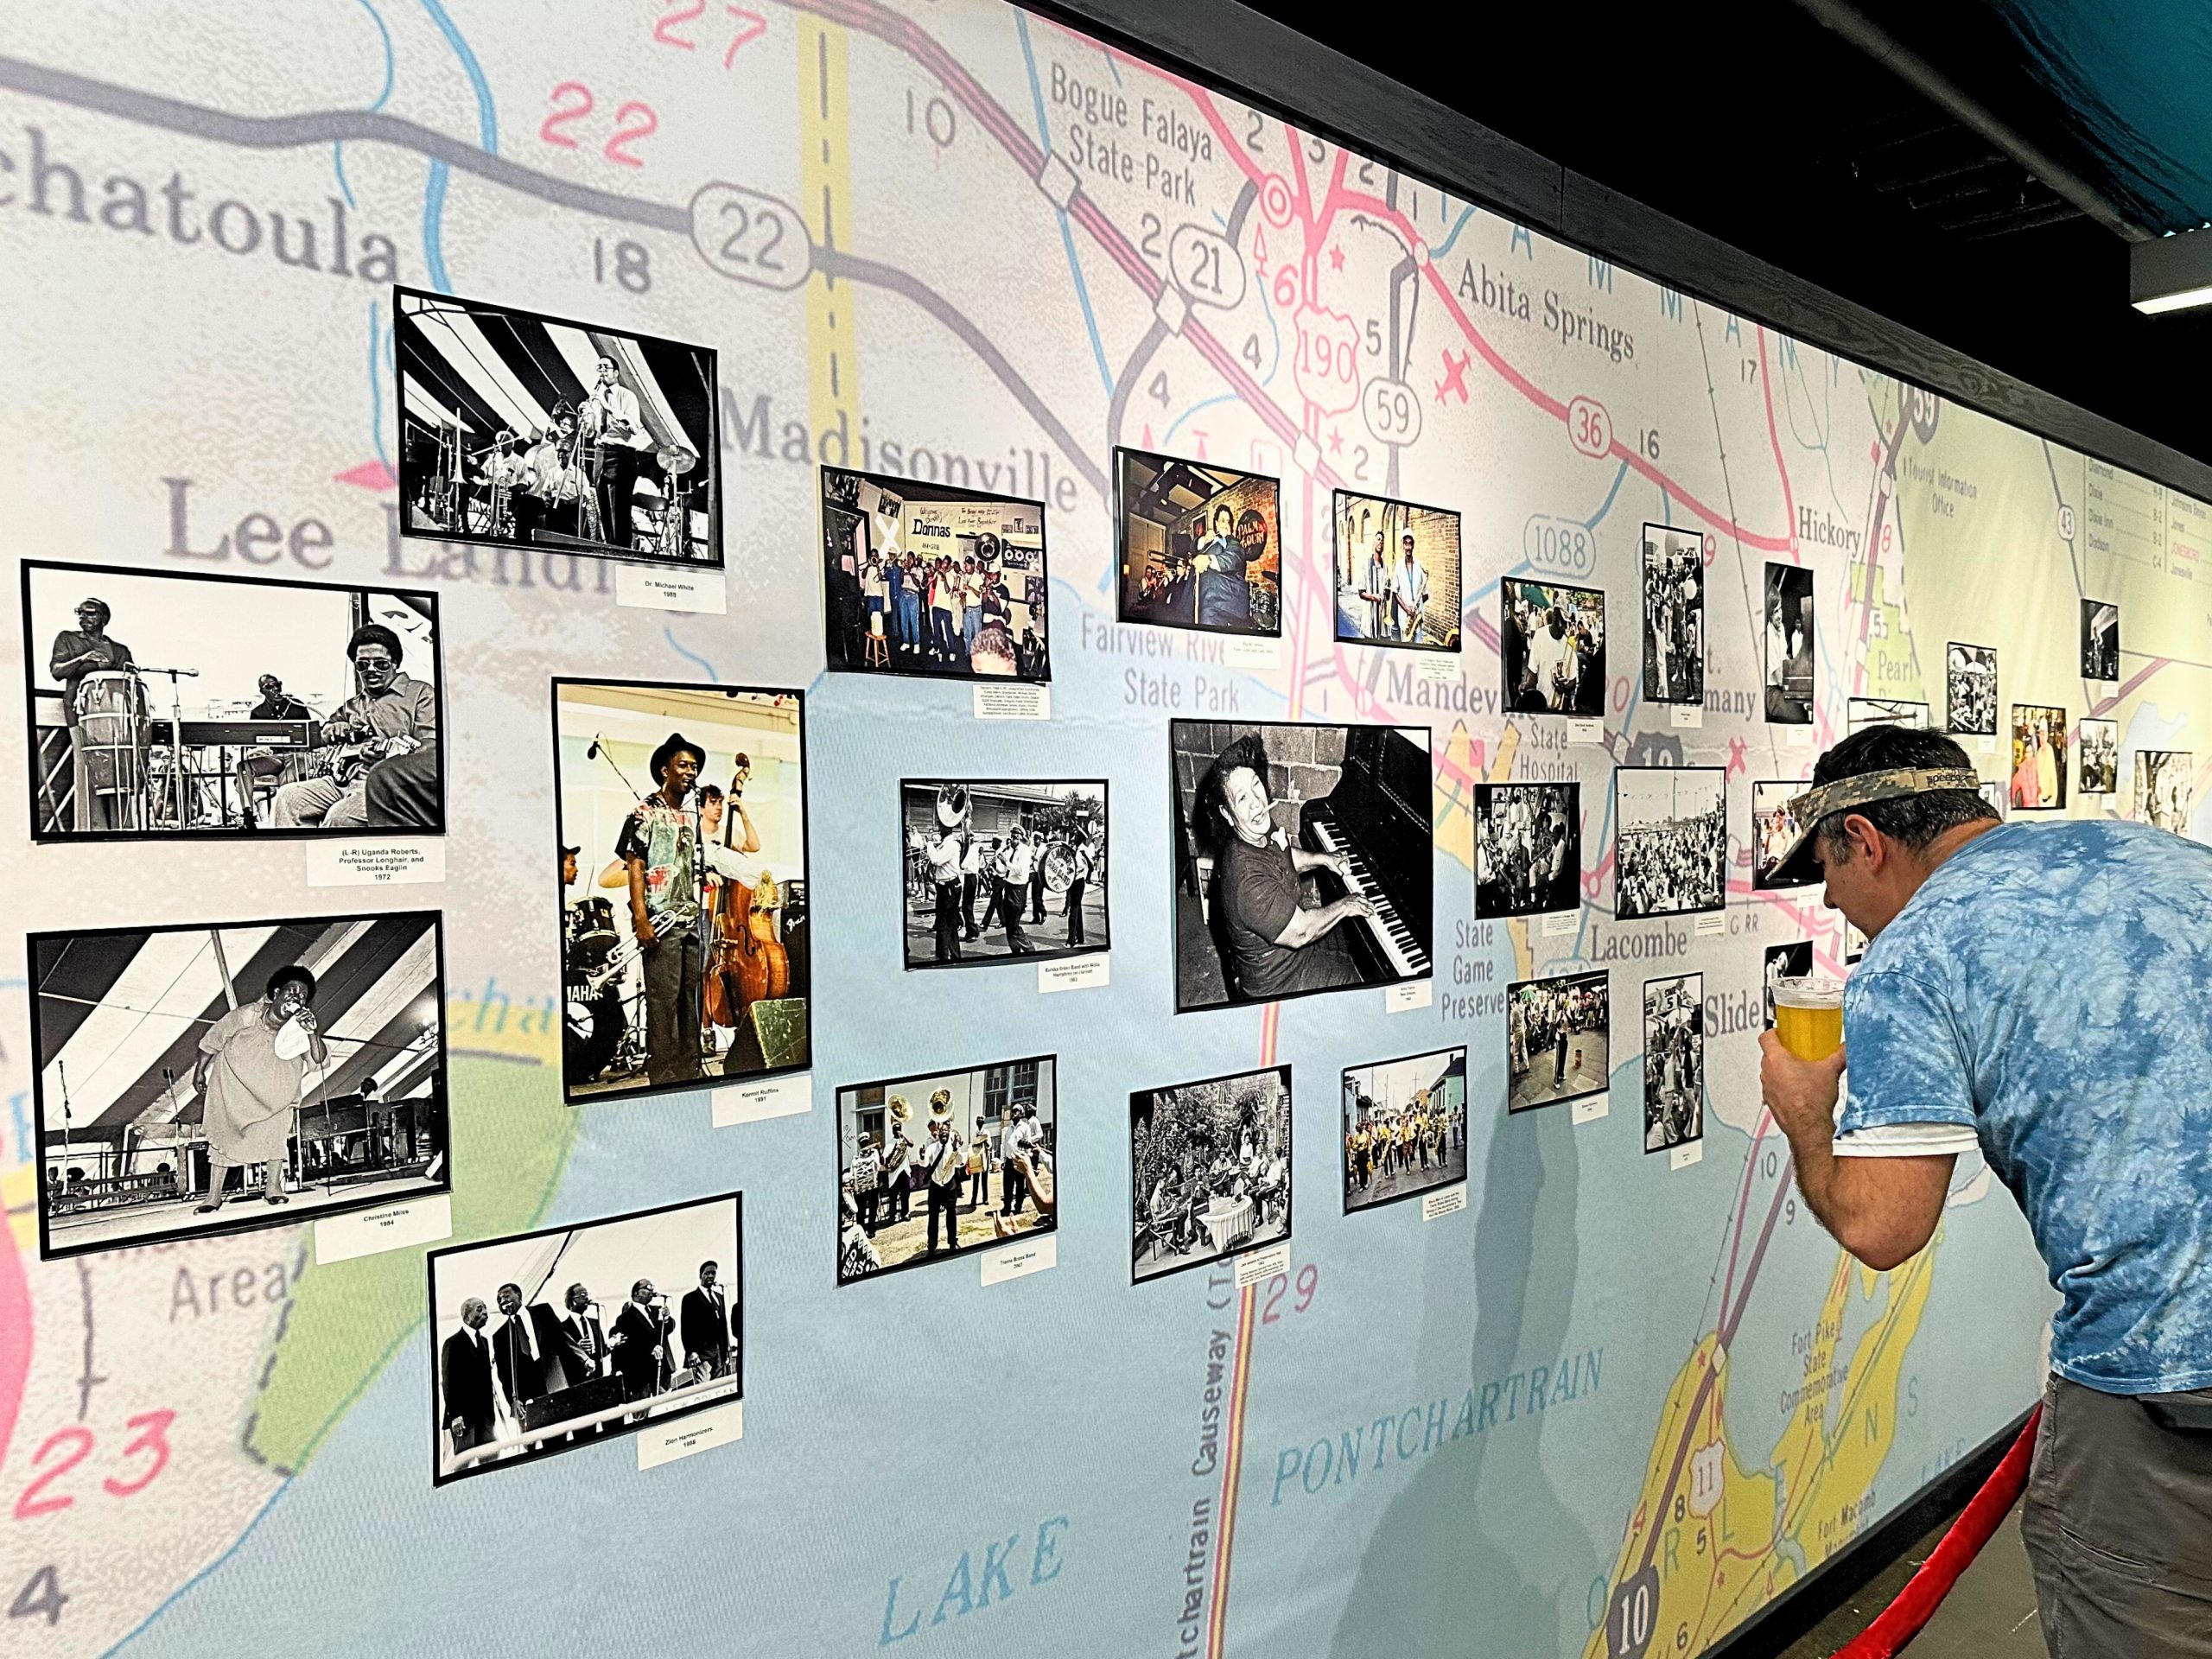 New Orleans Jazz Fest Photo Archive. A man standing looking at photos on the wall.